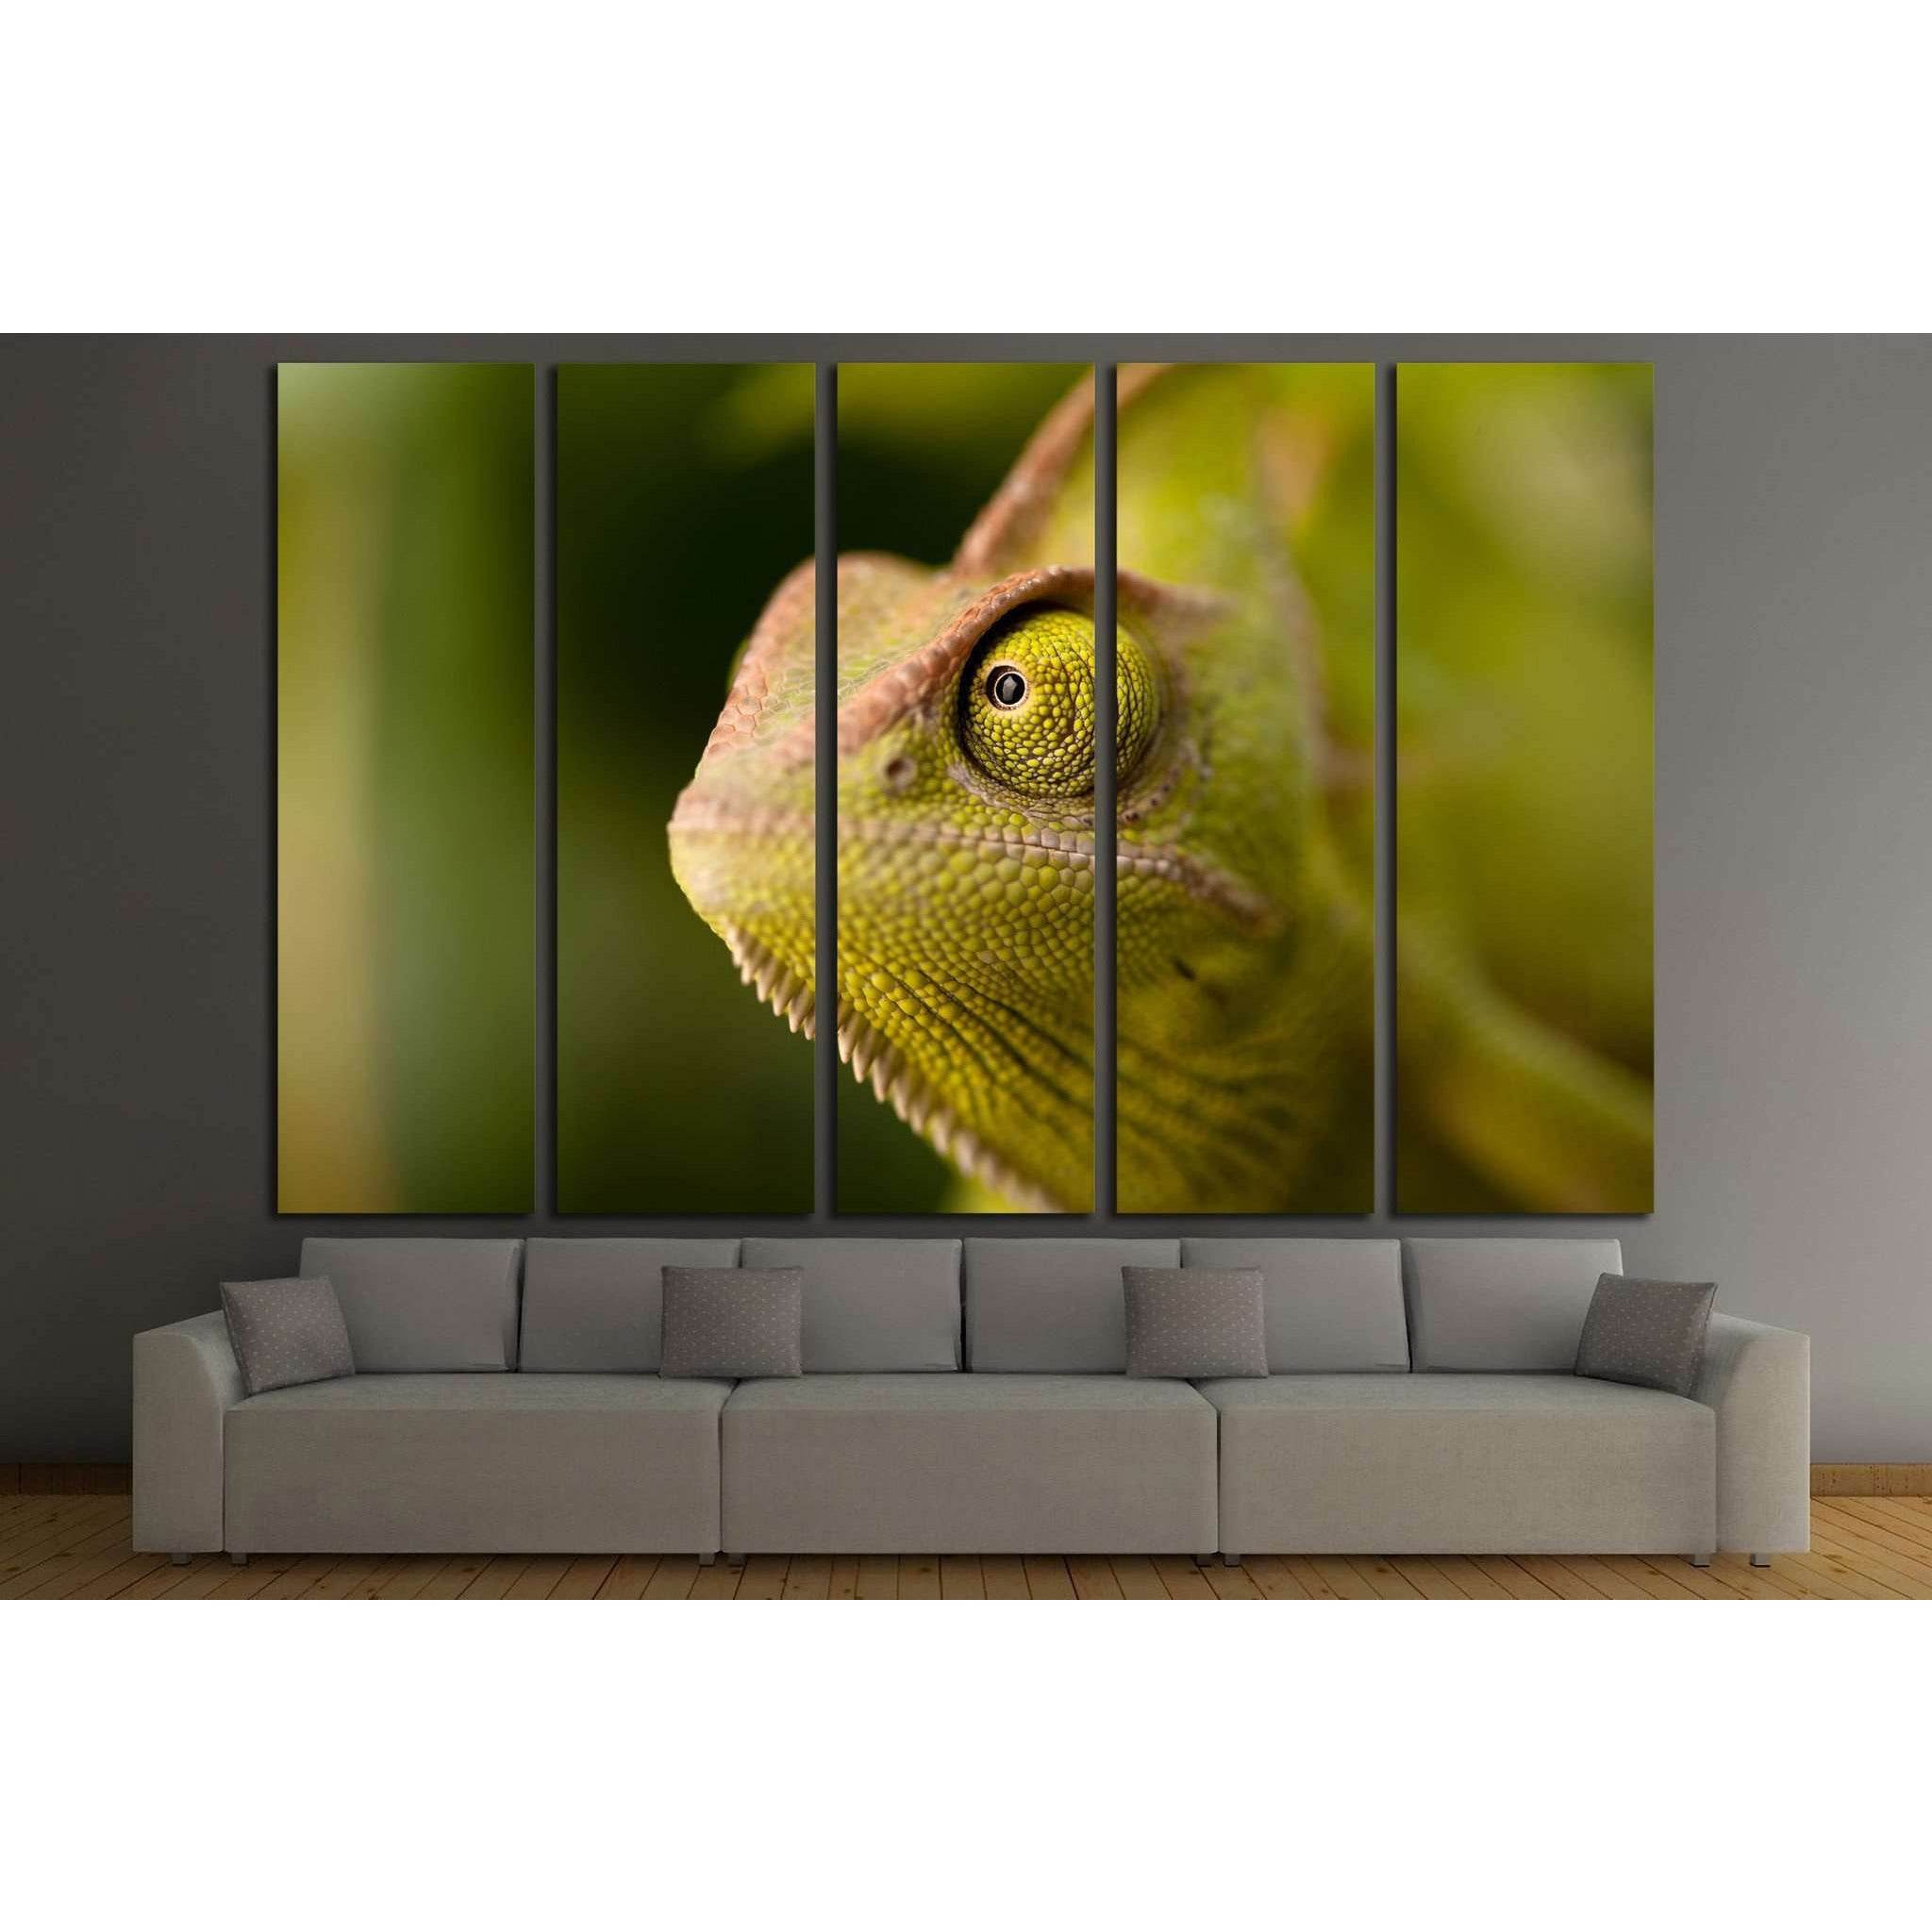 Green chameleon camouflaged by taking colors of its natural background №1829 Ready to Hang Canvas Print